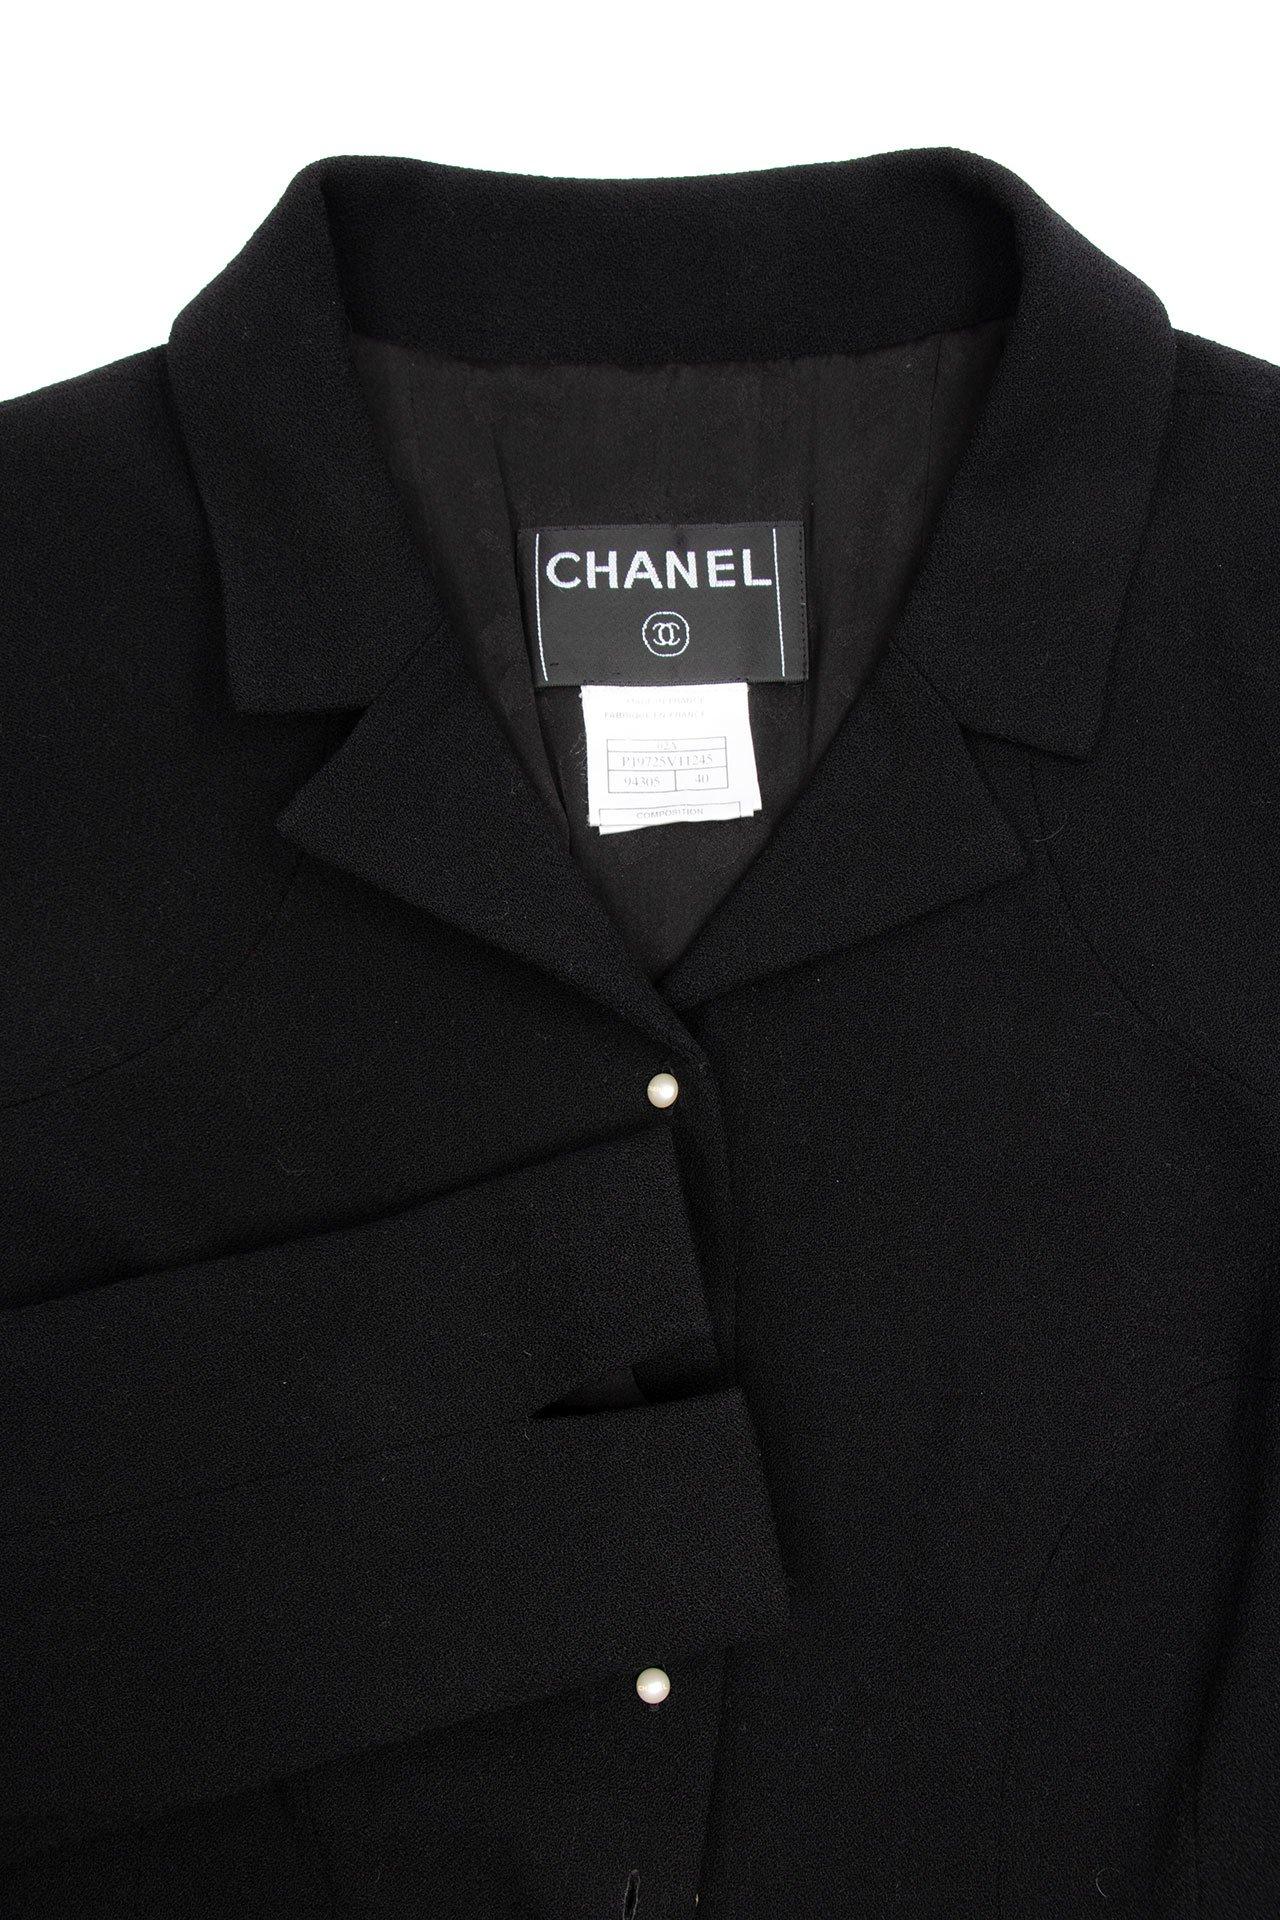 Chanel Pearl Buttons Black Tweed Coat Jacket In Excellent Condition For Sale In Dubai, AE